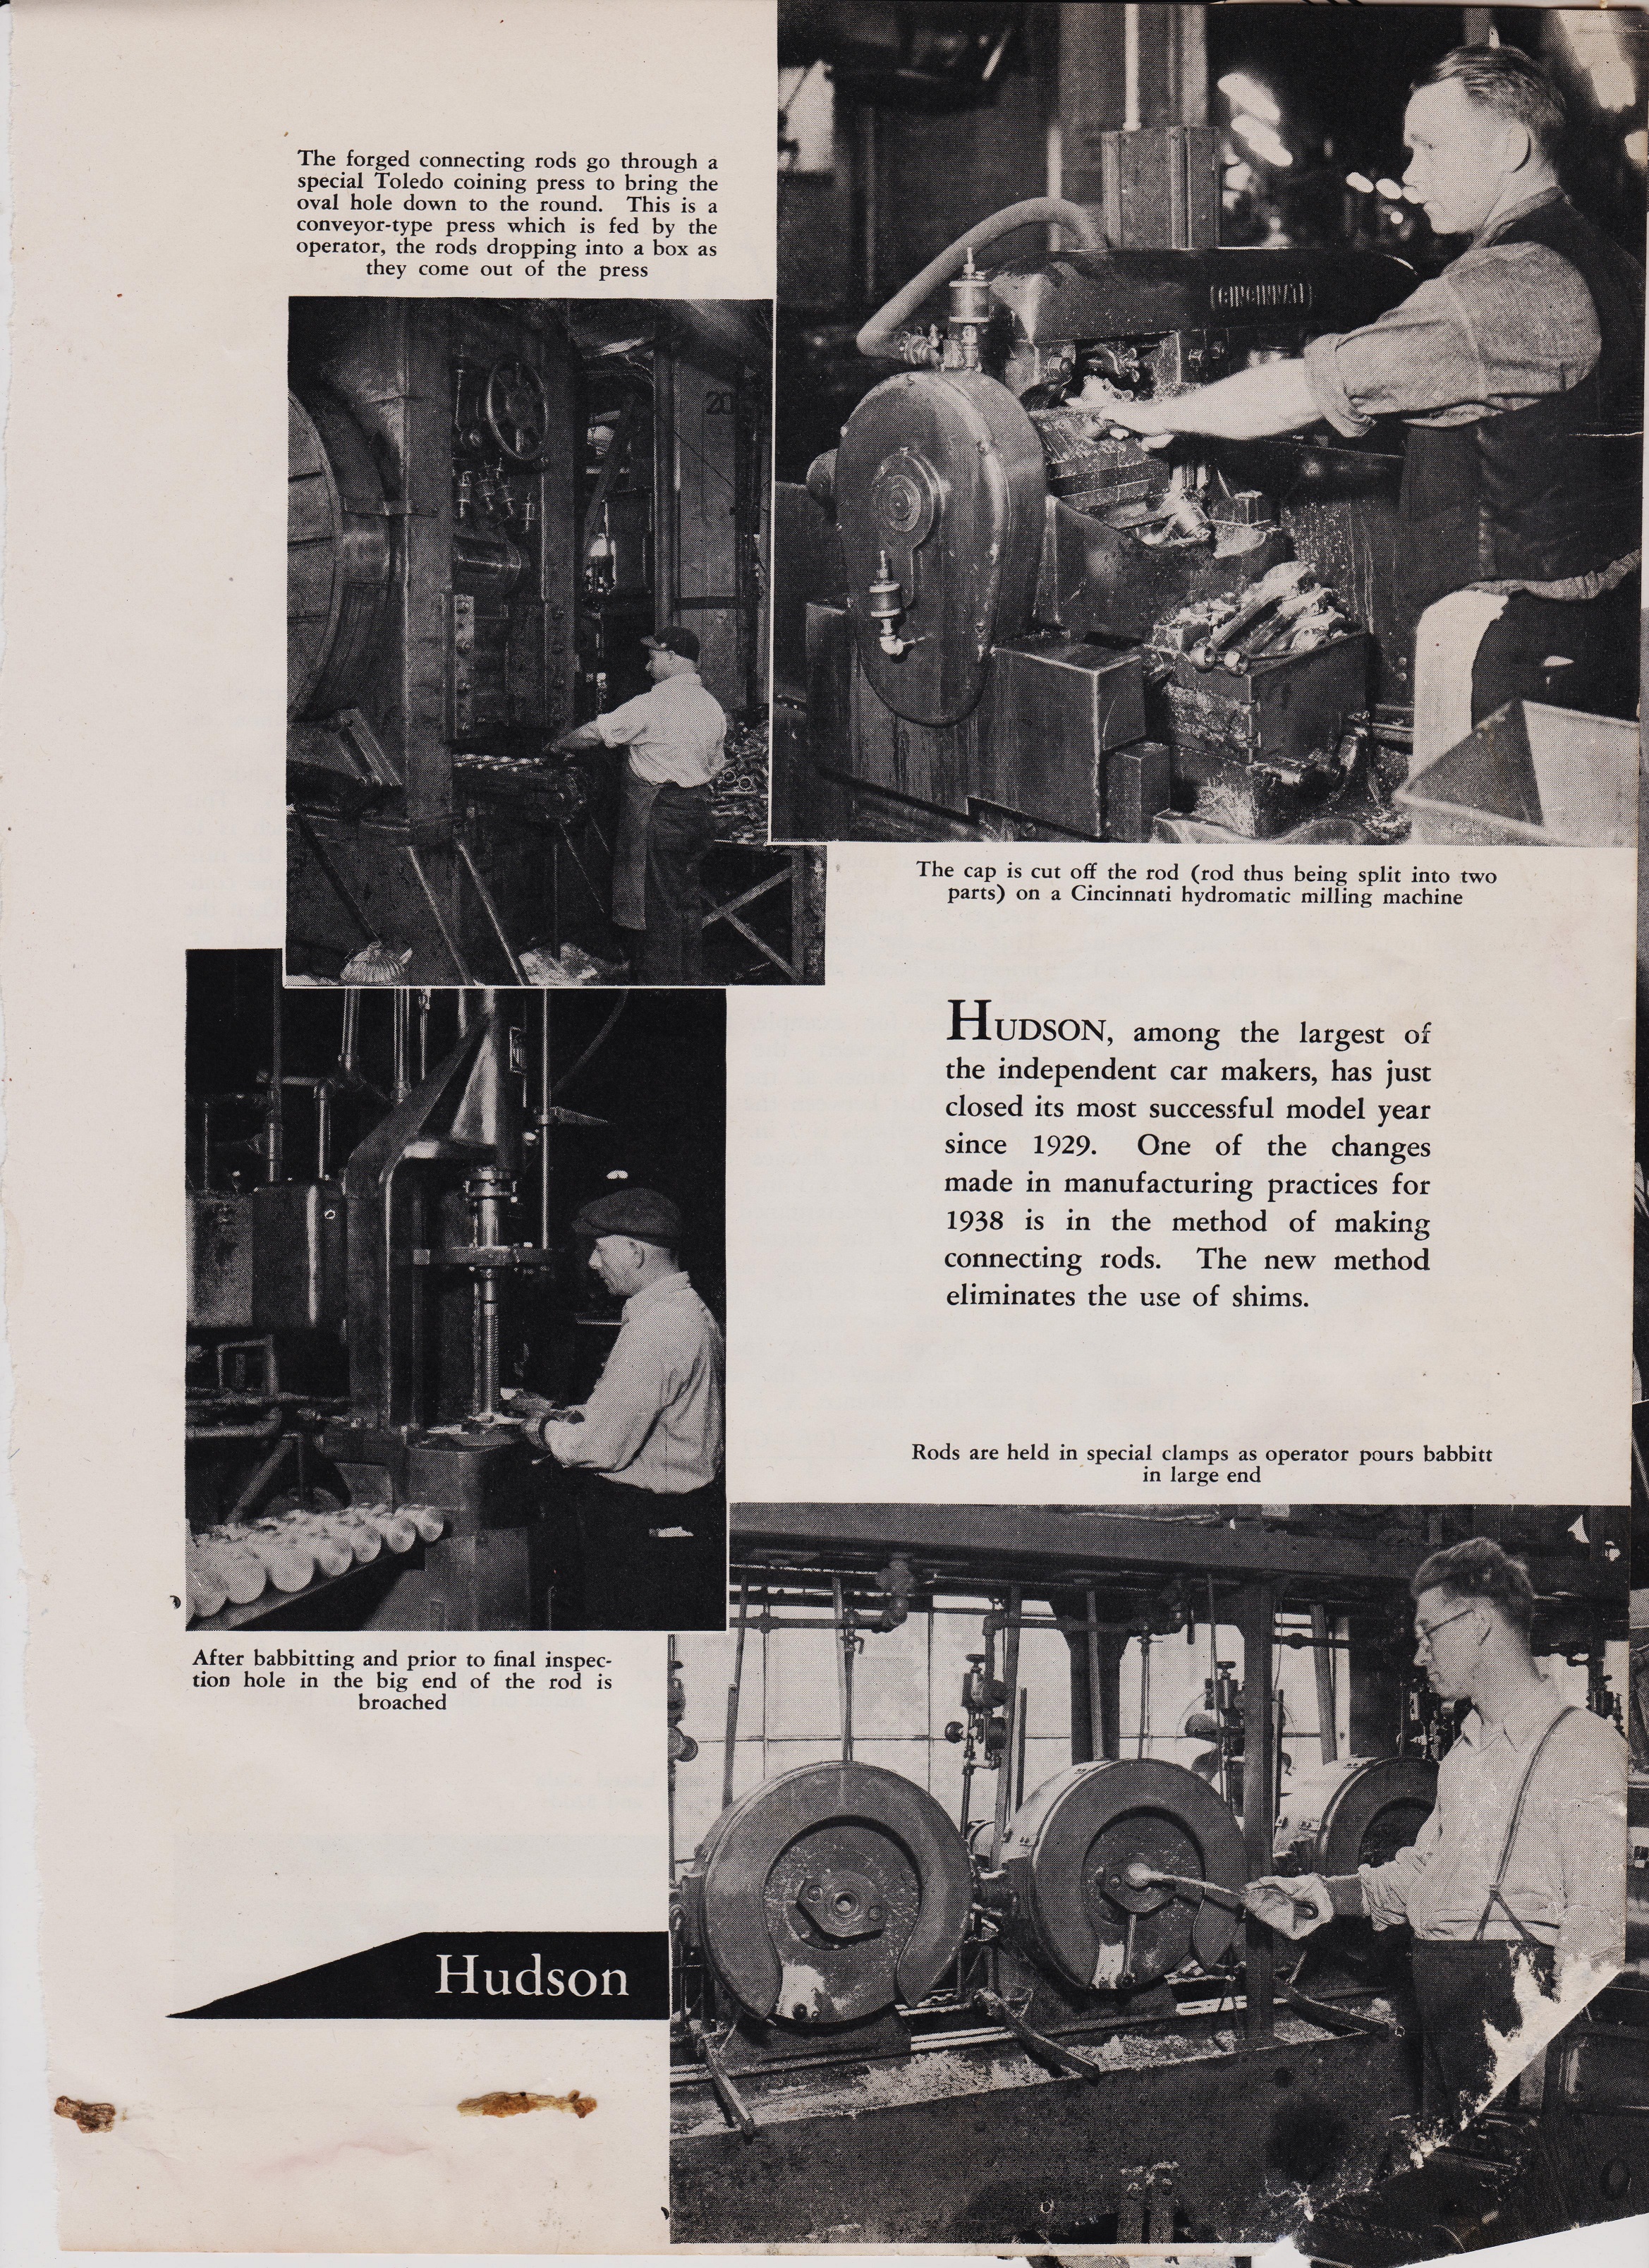 https://antiquemachinery.com/images-1938/American-Machinist-Oct-20-1937-pg-493-The-1938-Automoble-Show-1938-Hudson-New-production-methods-550-50per.jpg